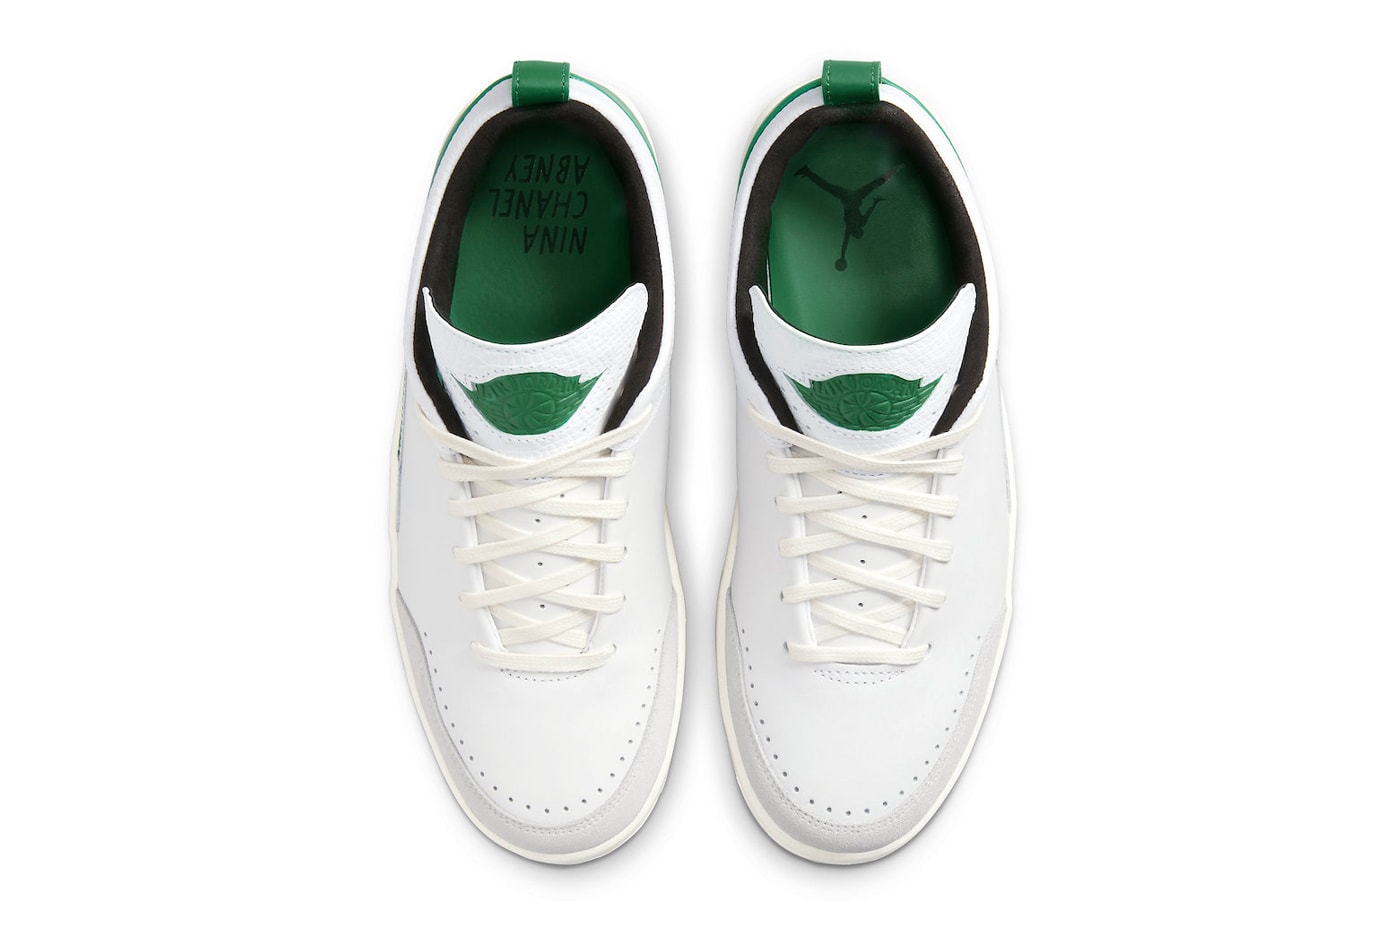 Nina Chanel Abney Air Jordan 2 Low SE Official Look Release Info DQ0560-160 Date Buy Price White Malachite Neutral Grey Sail